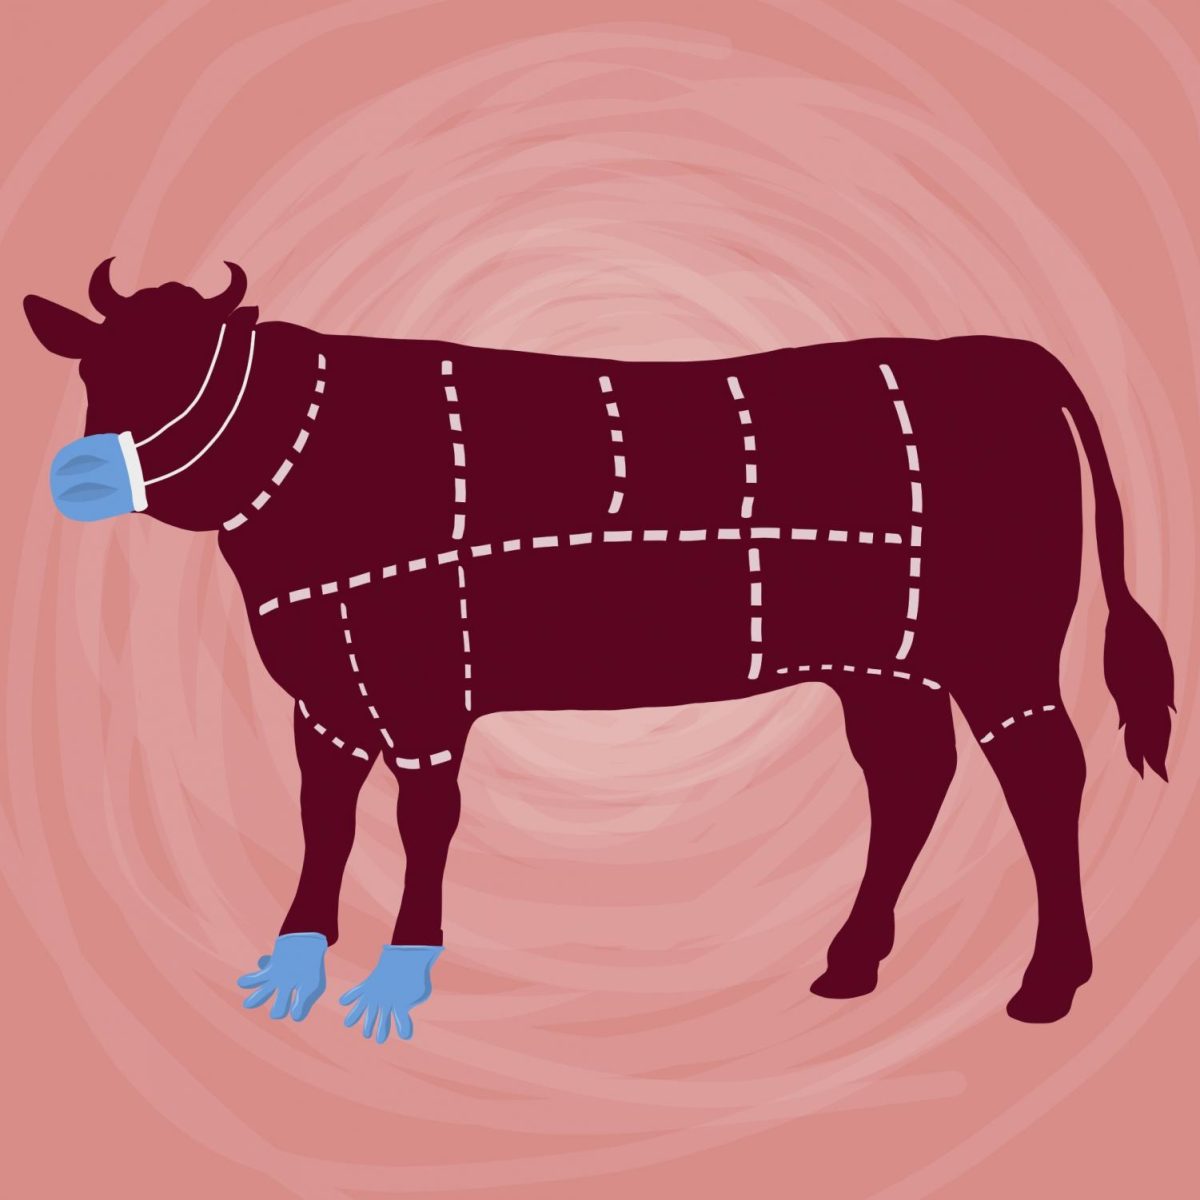 A diagram showing a cuts of meat of a cow. The cow has a face mask and gloves on.